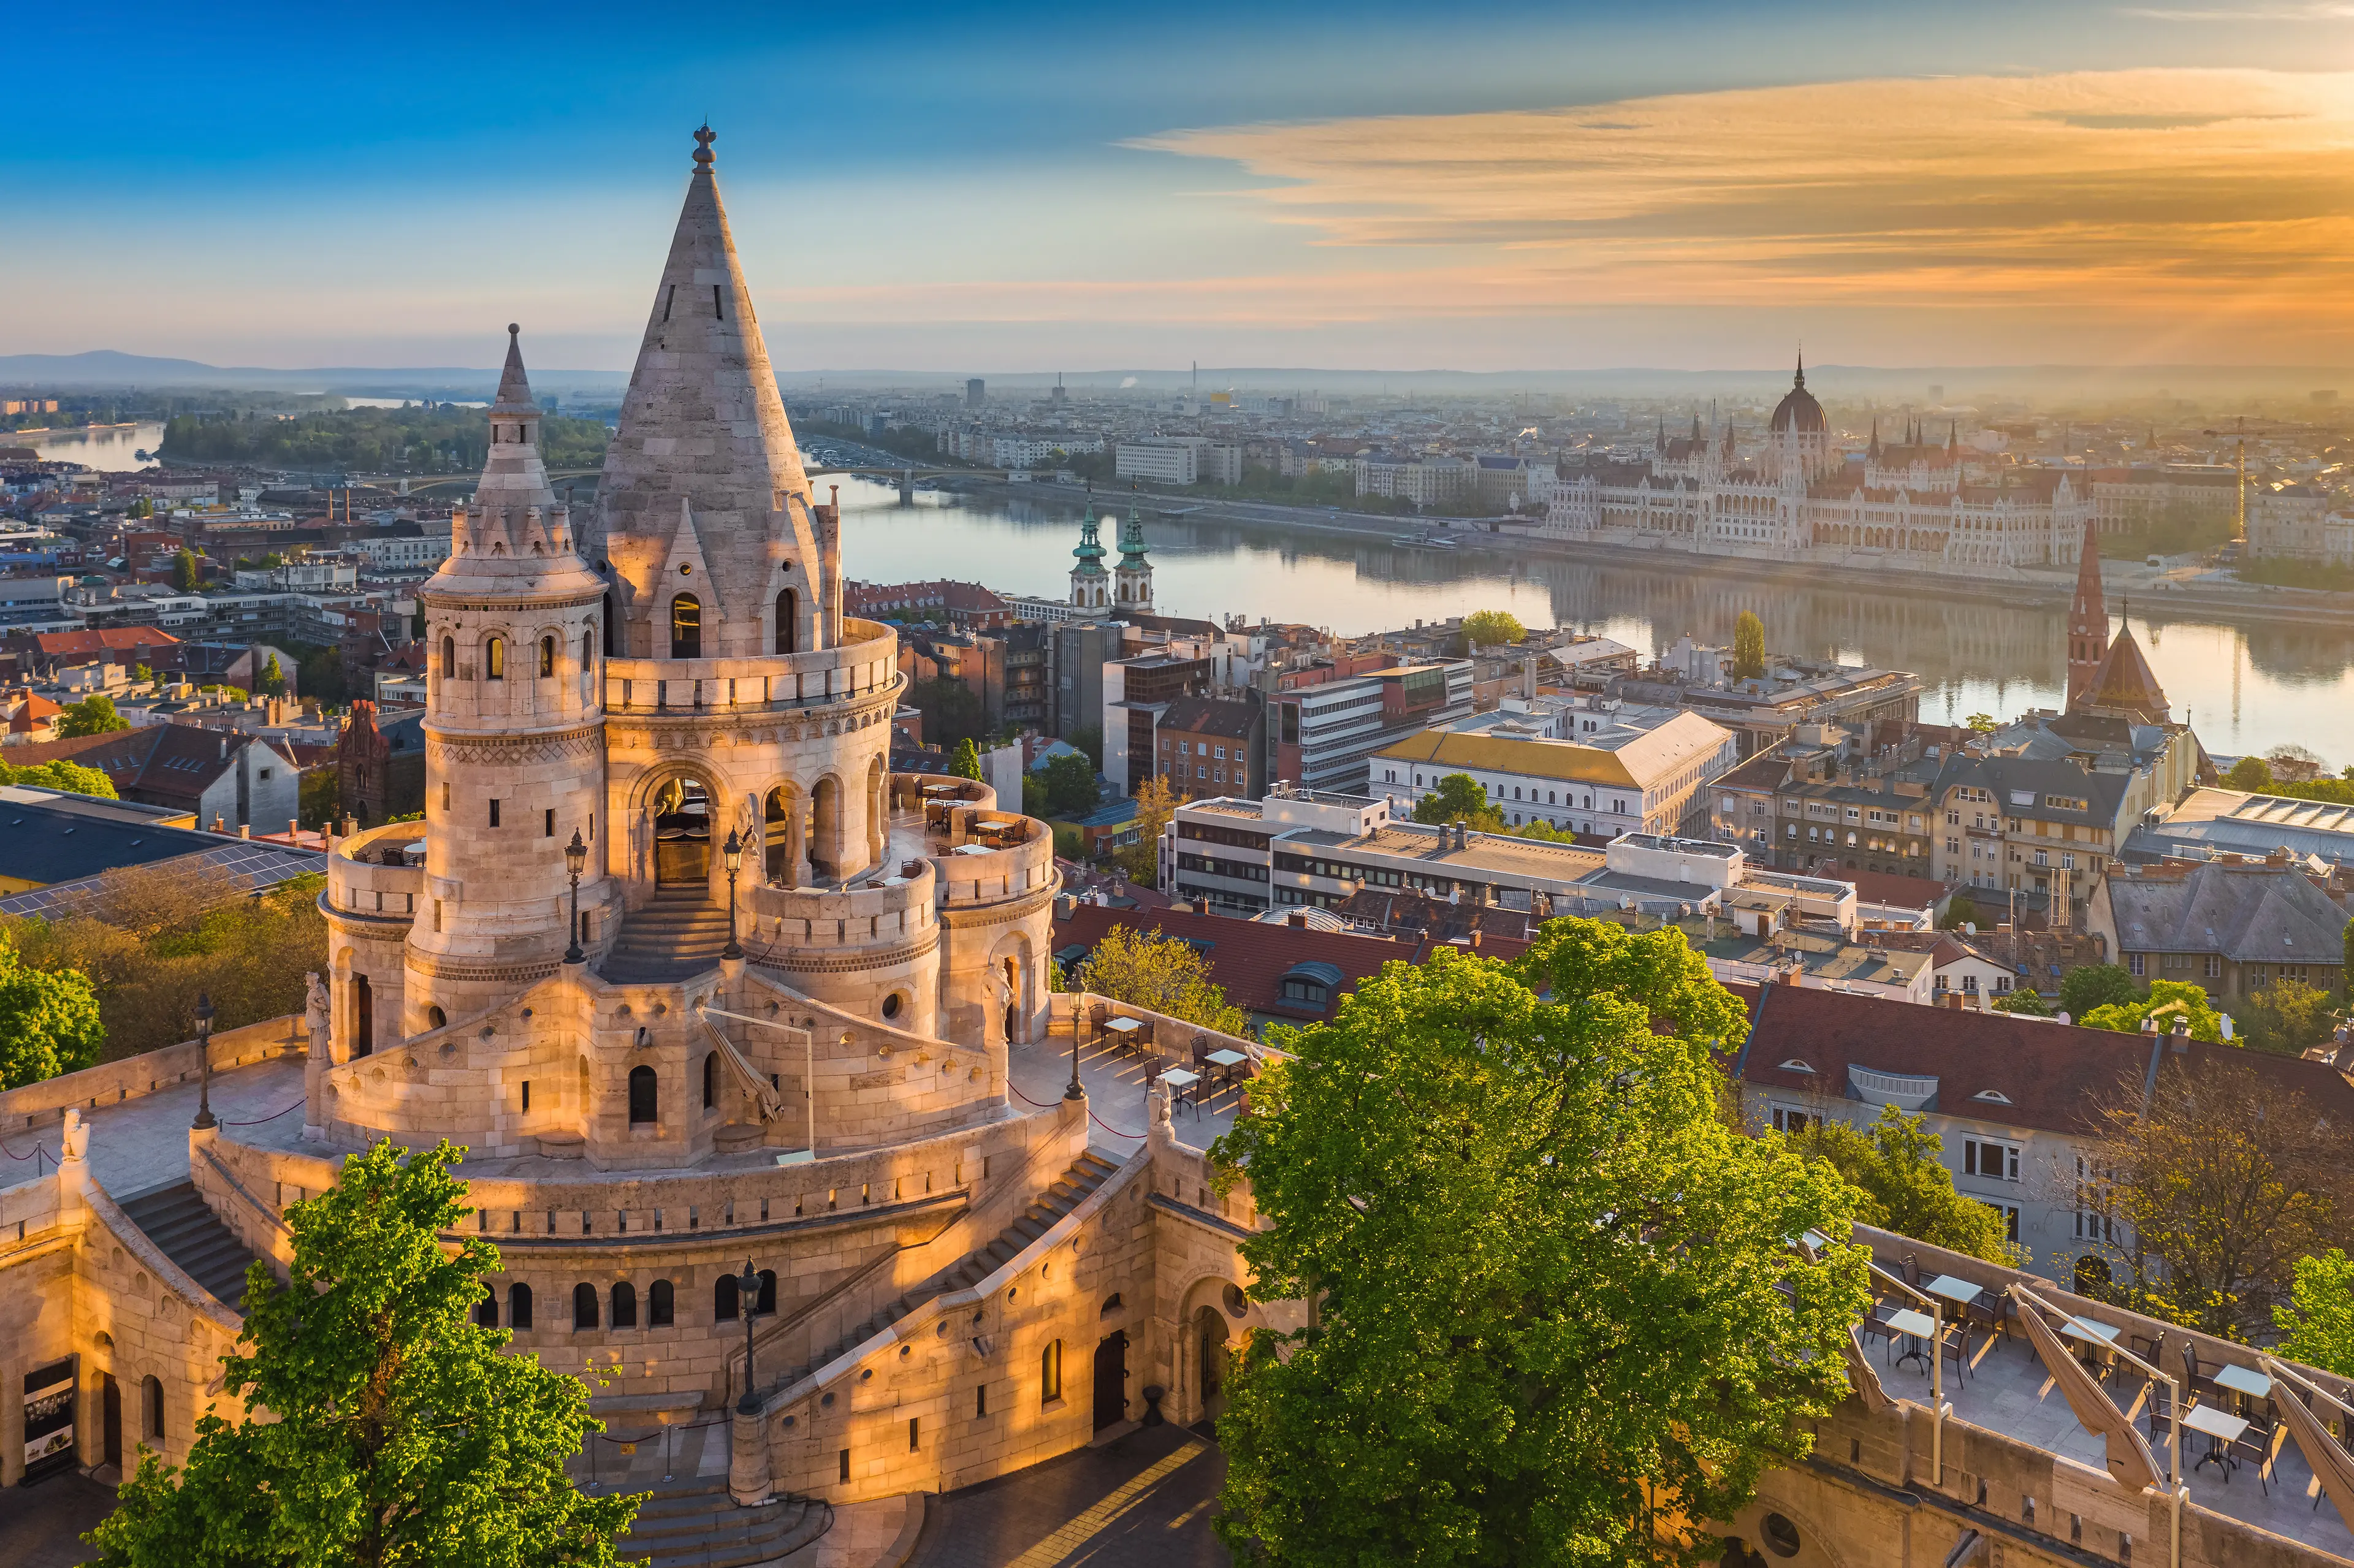 Tower of Fisherman's Bastion, Parliament of Hungary and River Danube